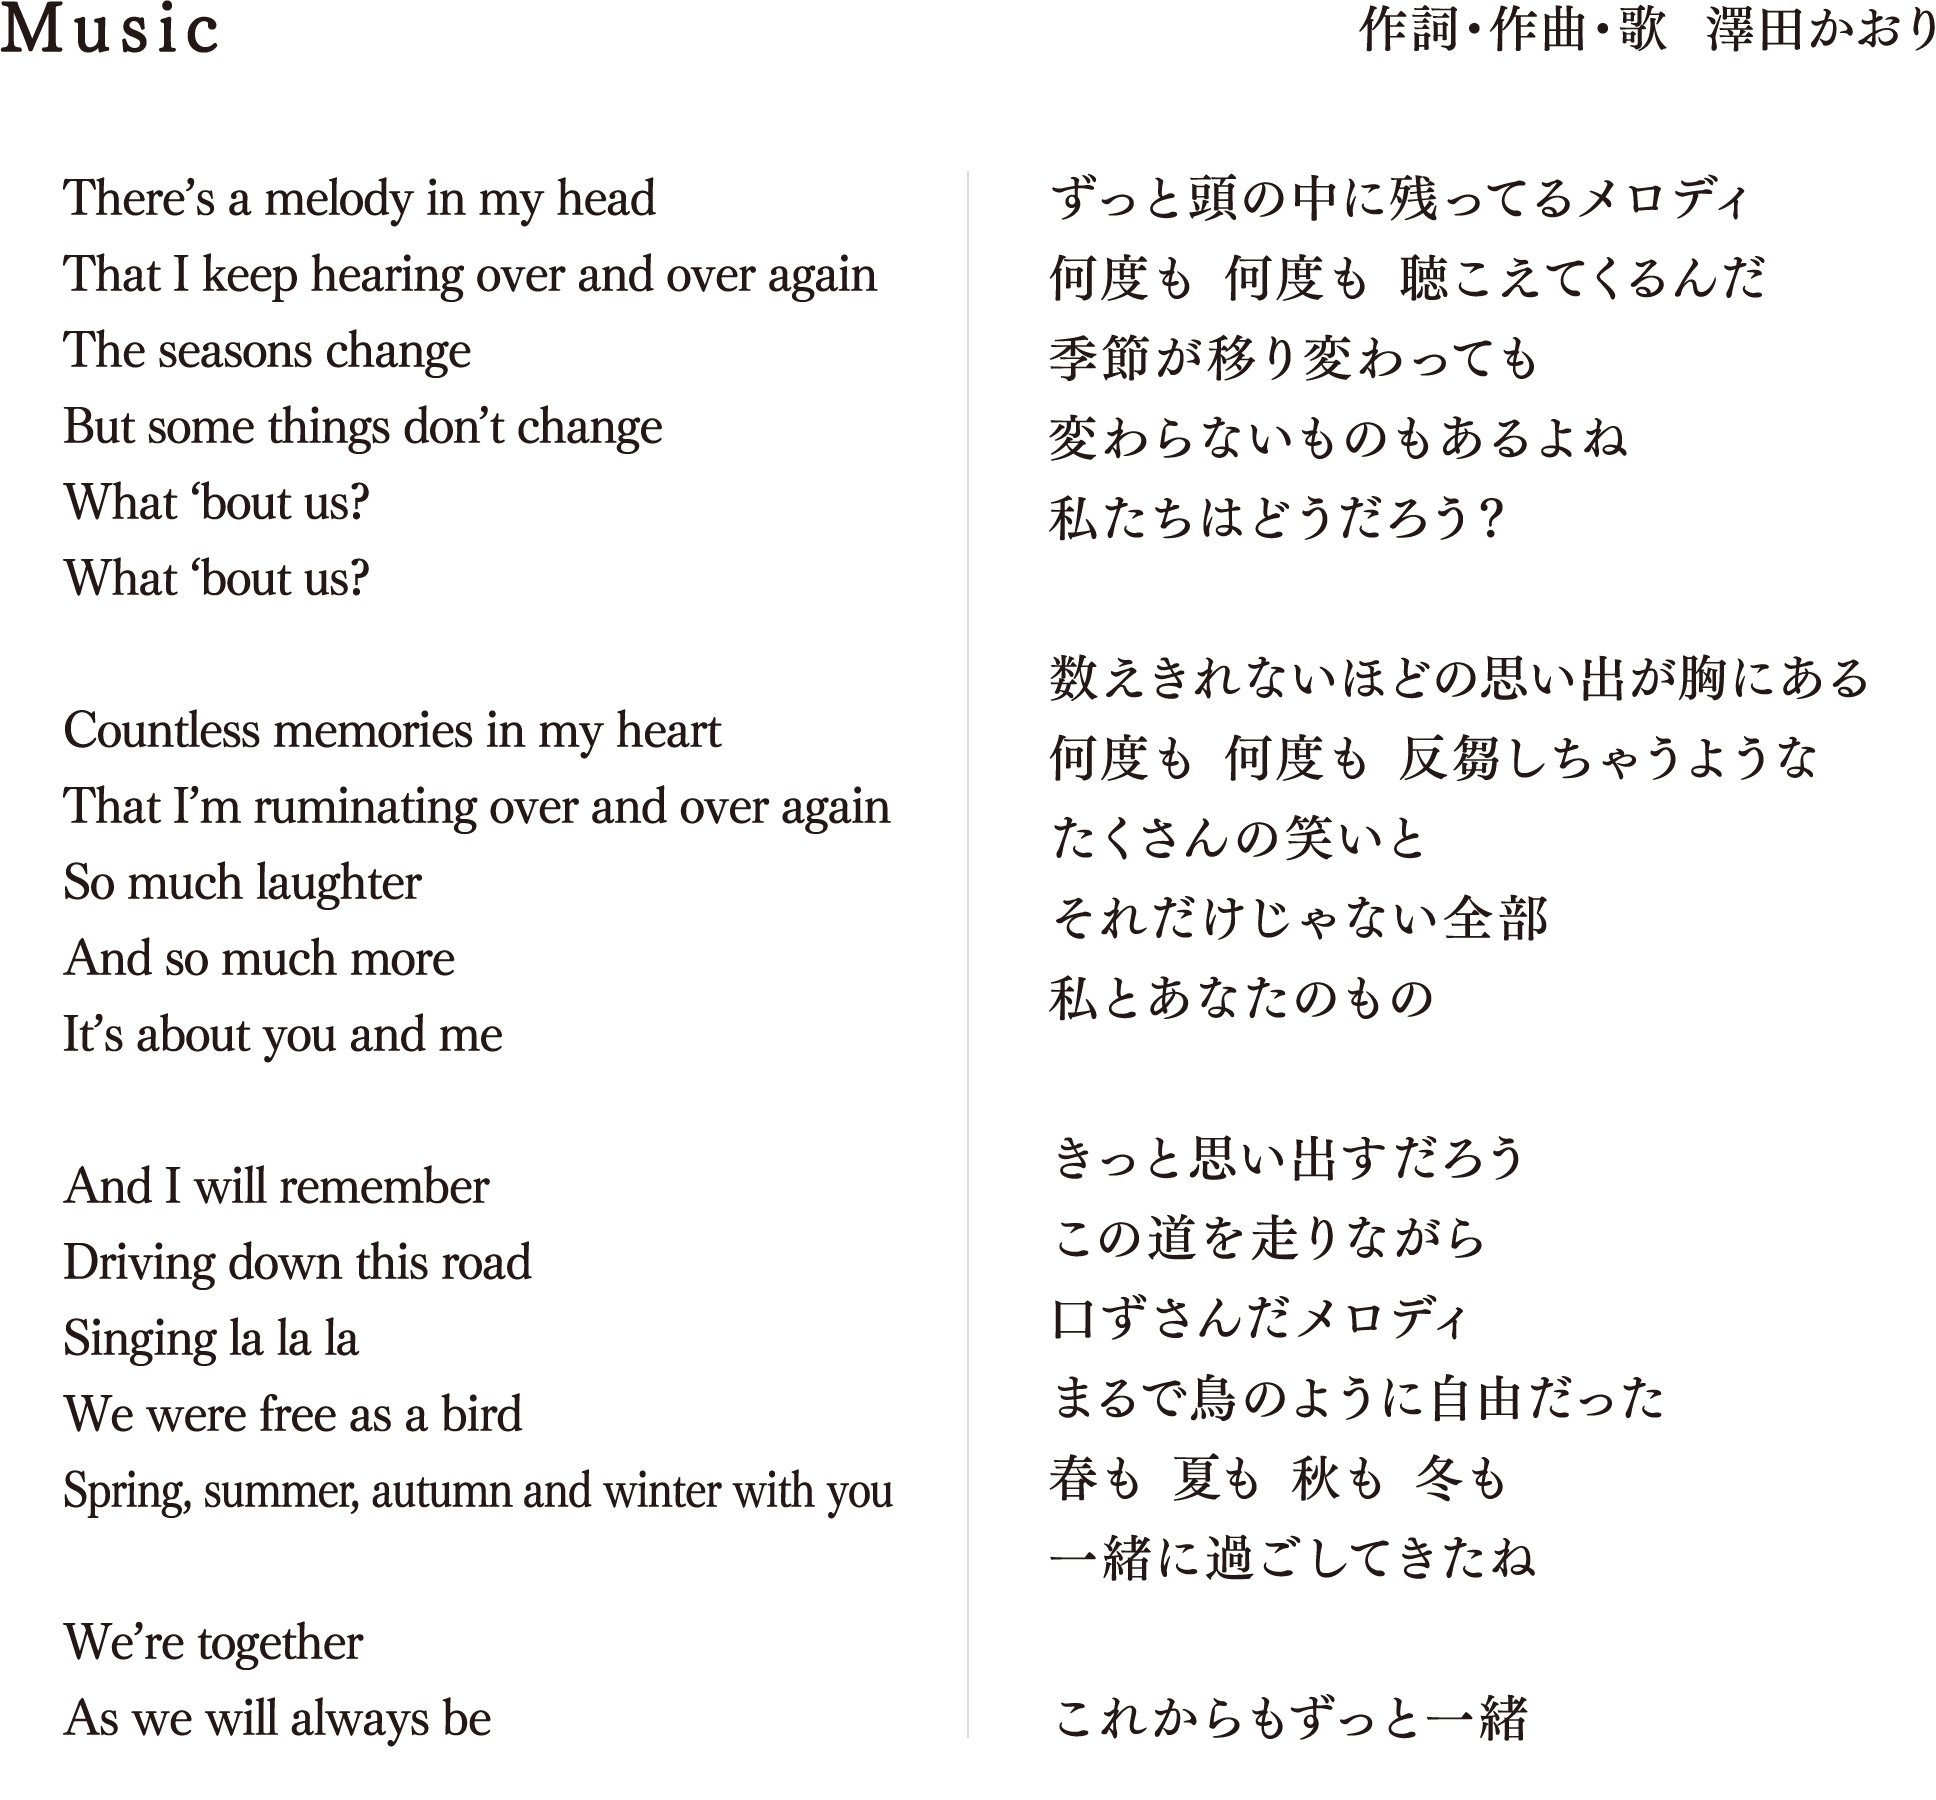 Music 作詞・作曲・歌  澤田かおり There’s a melody in my head That I keep hearing over and over again The seasons change But some things don’t change What ‘bout us? What ‘bout us? Countless memories in my heart That I’m ruminating over and over again So much laughter And so much more It’s about you and me And I will remember Driving down this road Singing la la la We were free as a bird Spring, summer, autumn and winter with you We’re together As we will always be ずっと頭の中に残ってるメロディ 何度も 何度も 聴こえてくるんだ 季節が移り変わっても 変わらないものもあるよね 私たちはどうだろう？ 数えきれないほどの思い出が胸にある 何度も 何度も 反芻しちゃうような たくさんの笑いと それだけじゃない全部 私とあなたのもの きっと思い出すだろう この道を走りながら 口ずさんだメロディ まるで鳥のように自由だった 春も 夏も 秋も 冬も 一緒に過ごしてきたね これからもずっと一緒